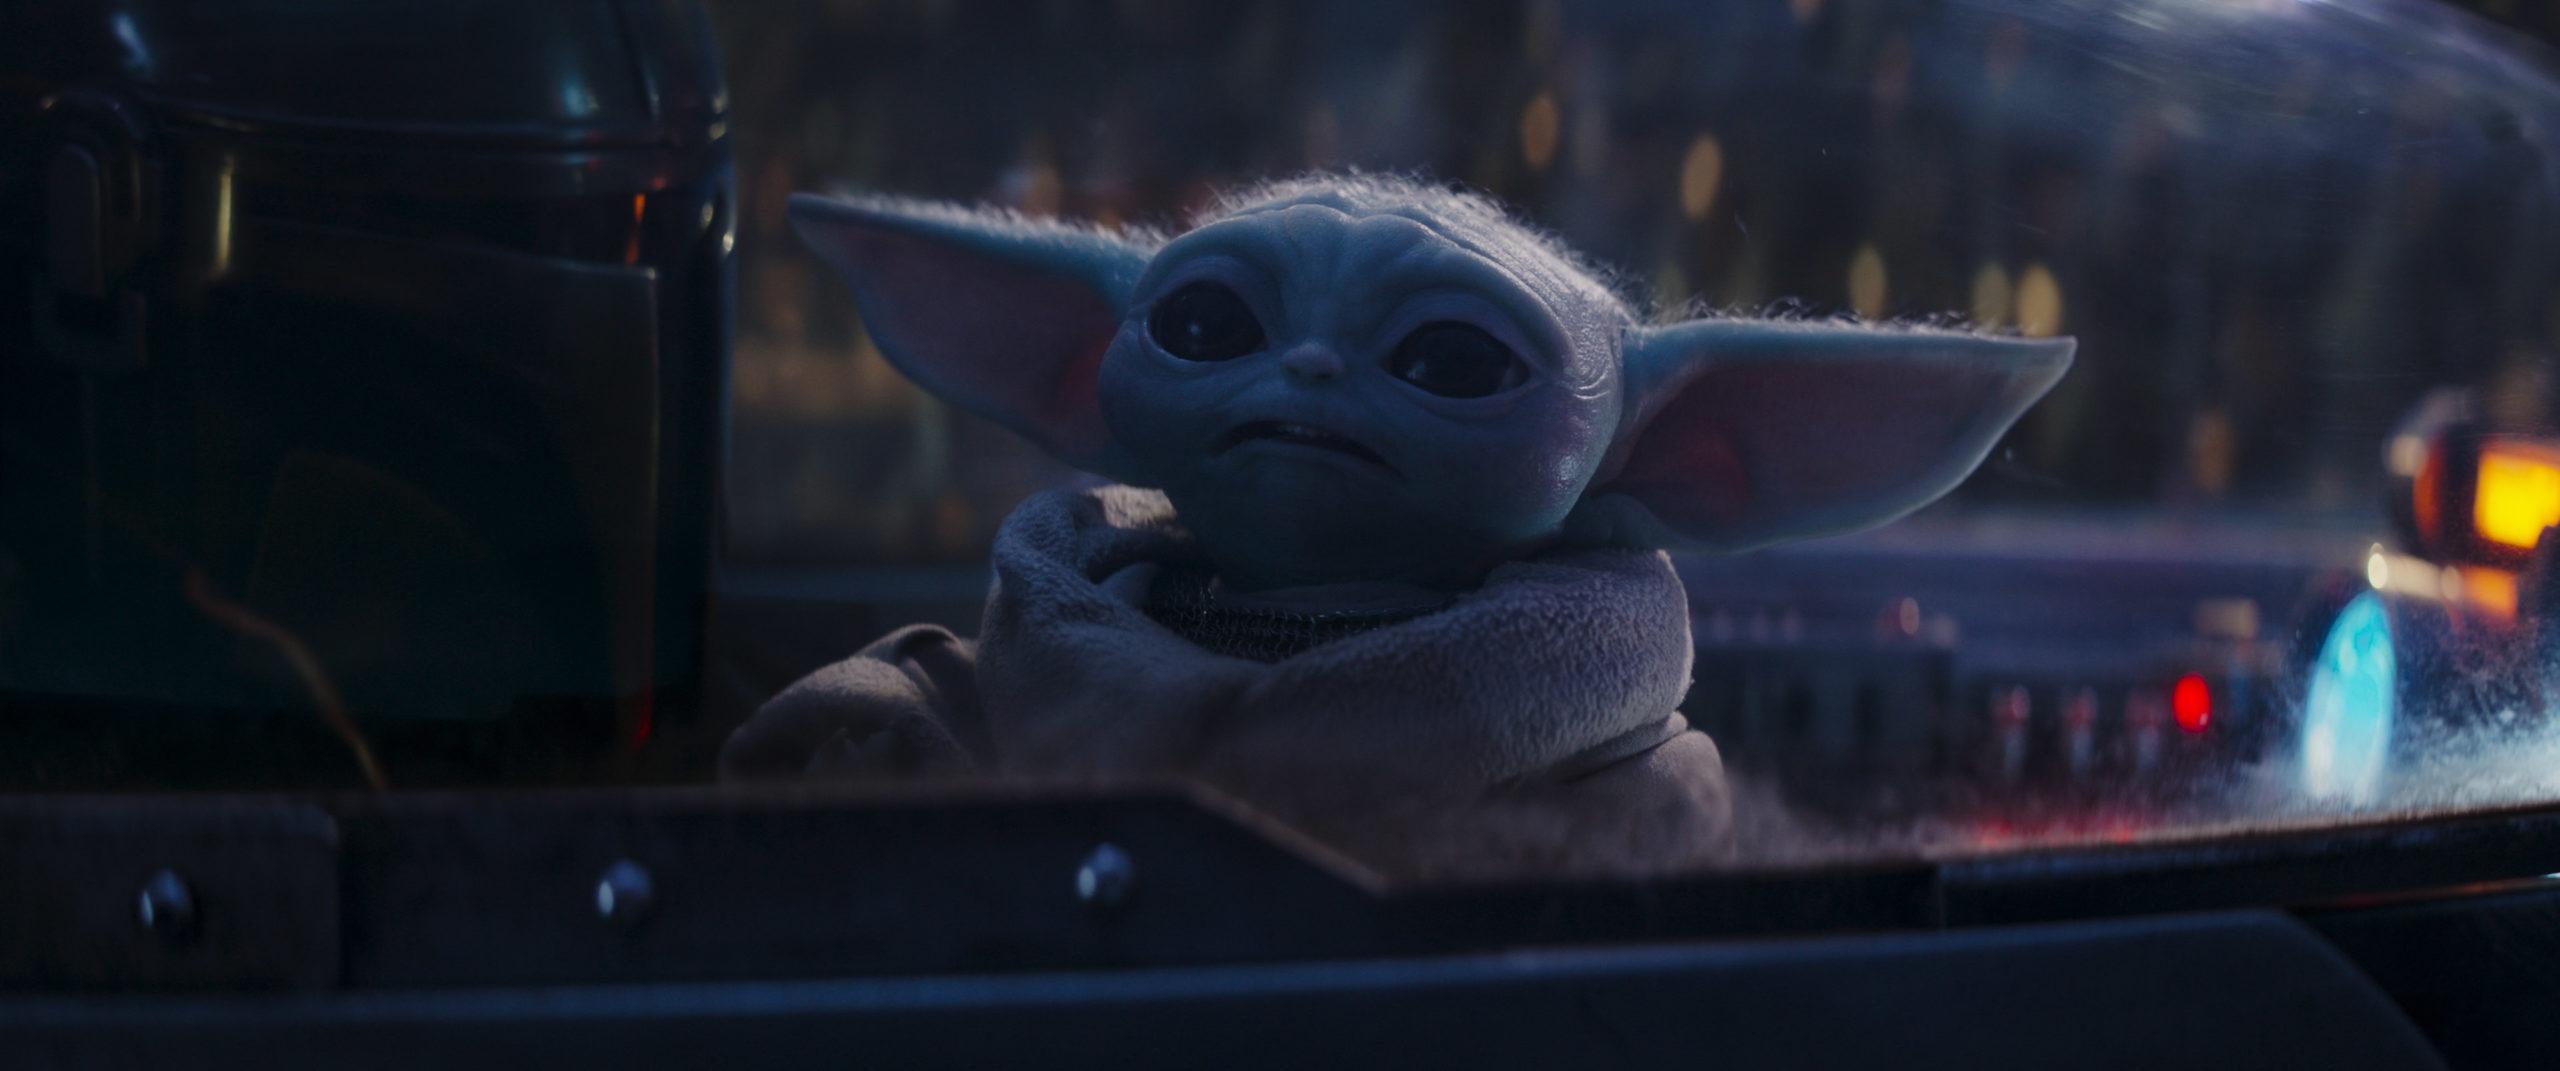 During a recent interview, The Mandalorian executive producer Dave Filoni says Grogu will talk sooner rather than later.